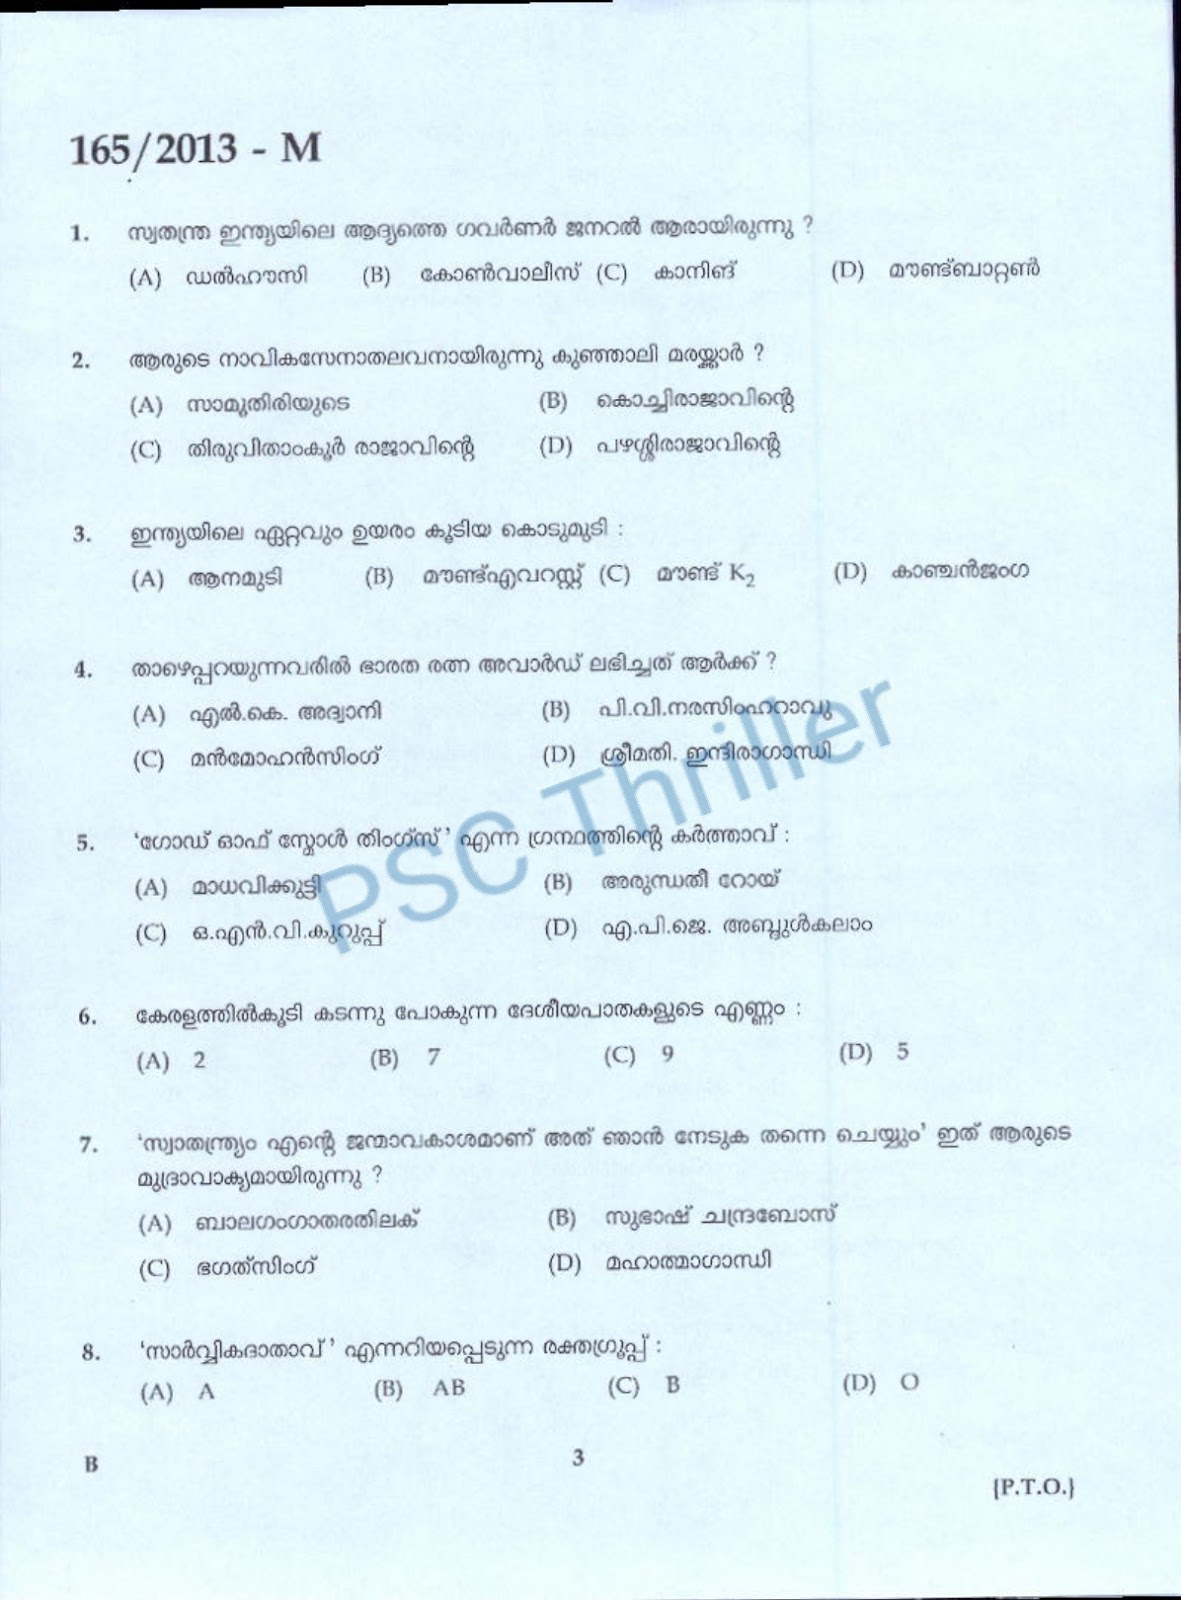 Boat Lascar Question Paper with Answer Key  (165/2013)